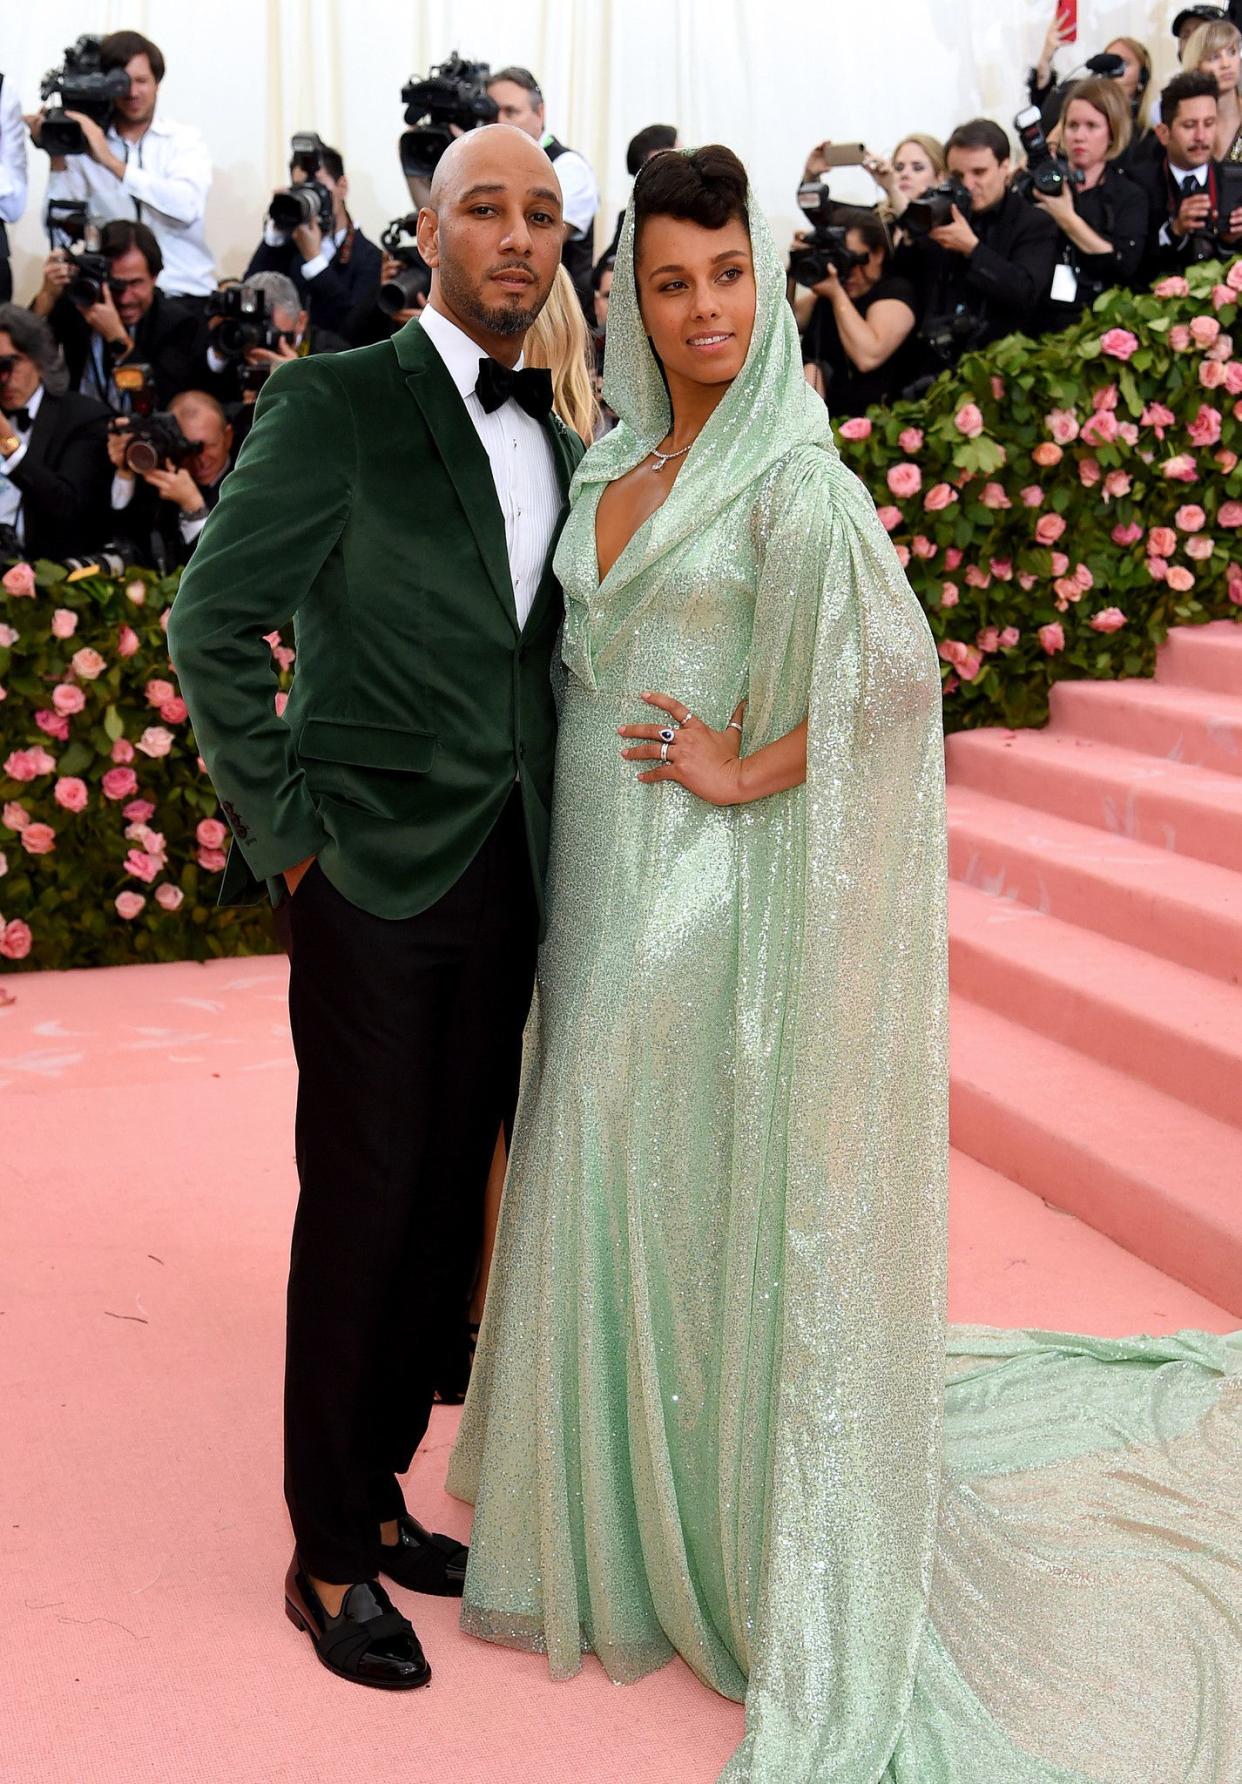 Swizz Beatz and Alicia Keys attend The 2019 Met Gala Celebrating Camp: Notes on Fashion at Metropolitan Museum of Art on May 06, 2019 in New York City.